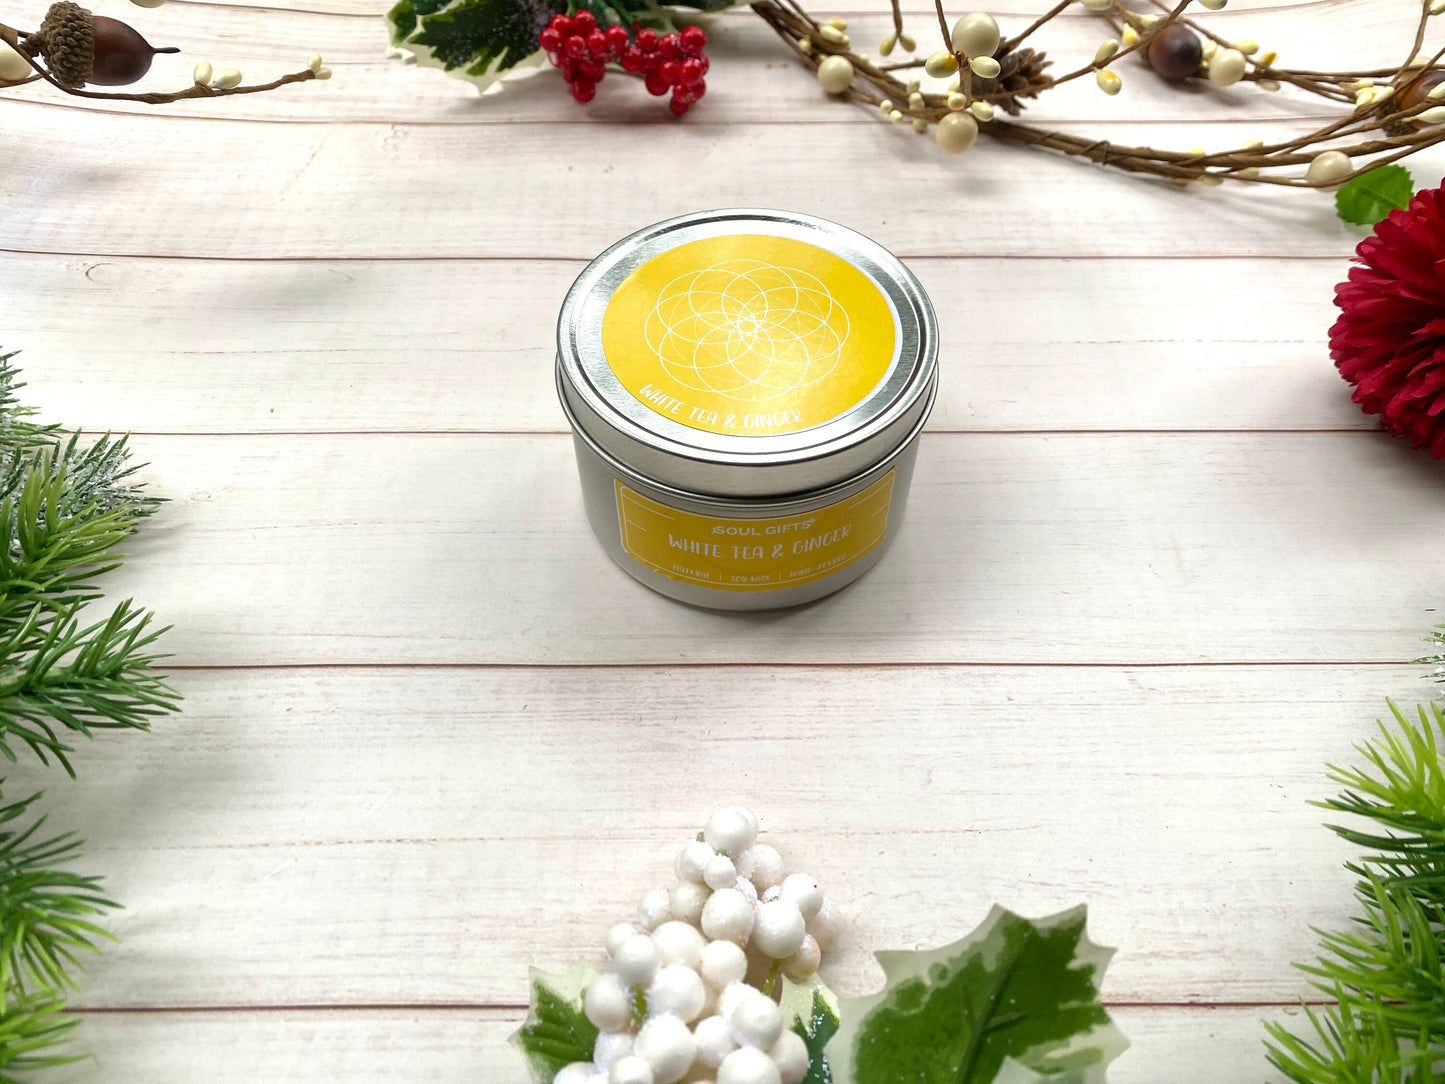 White Tea Ginger Candle - Soul Gifts Soy Candle - 8oz Tin Candle